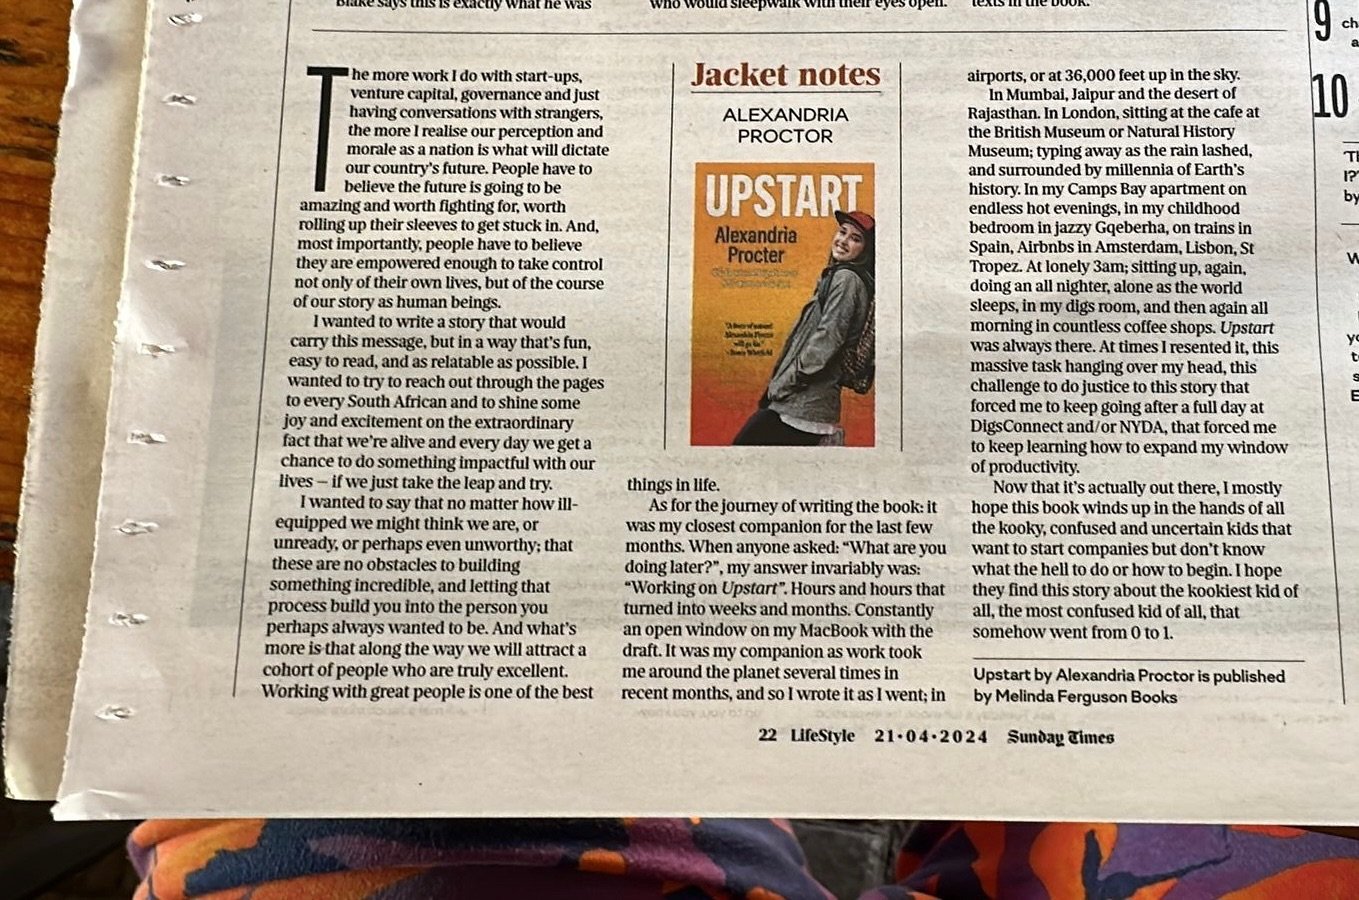 So I wrote a little thing and it got published this morning in The Sunday Times @thetimes Newspaper 🗞️😚🍉

&mdash;&mdash;-

Now that it&rsquo;s actually out there, I mostly hope that this book winds up in the hands of all the kooky, confused and un